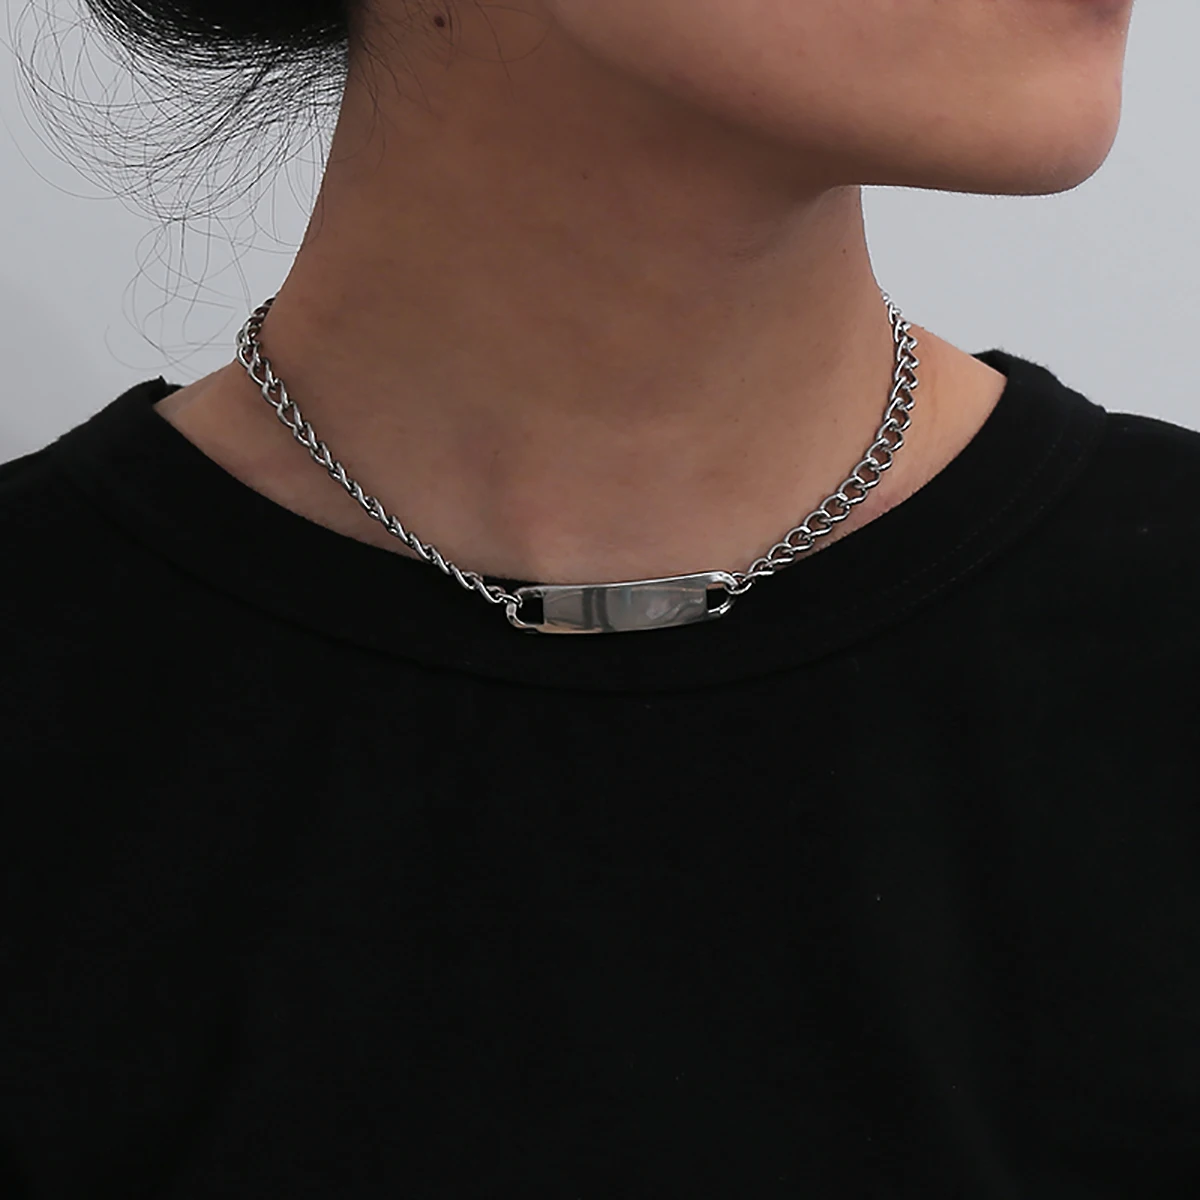 

SHIXIN Punk Stainless Steel Chain for Women/Men Hiphop Chunky Short Choker Necklace Colar Fashion Statement Jewelry on Neck 2020